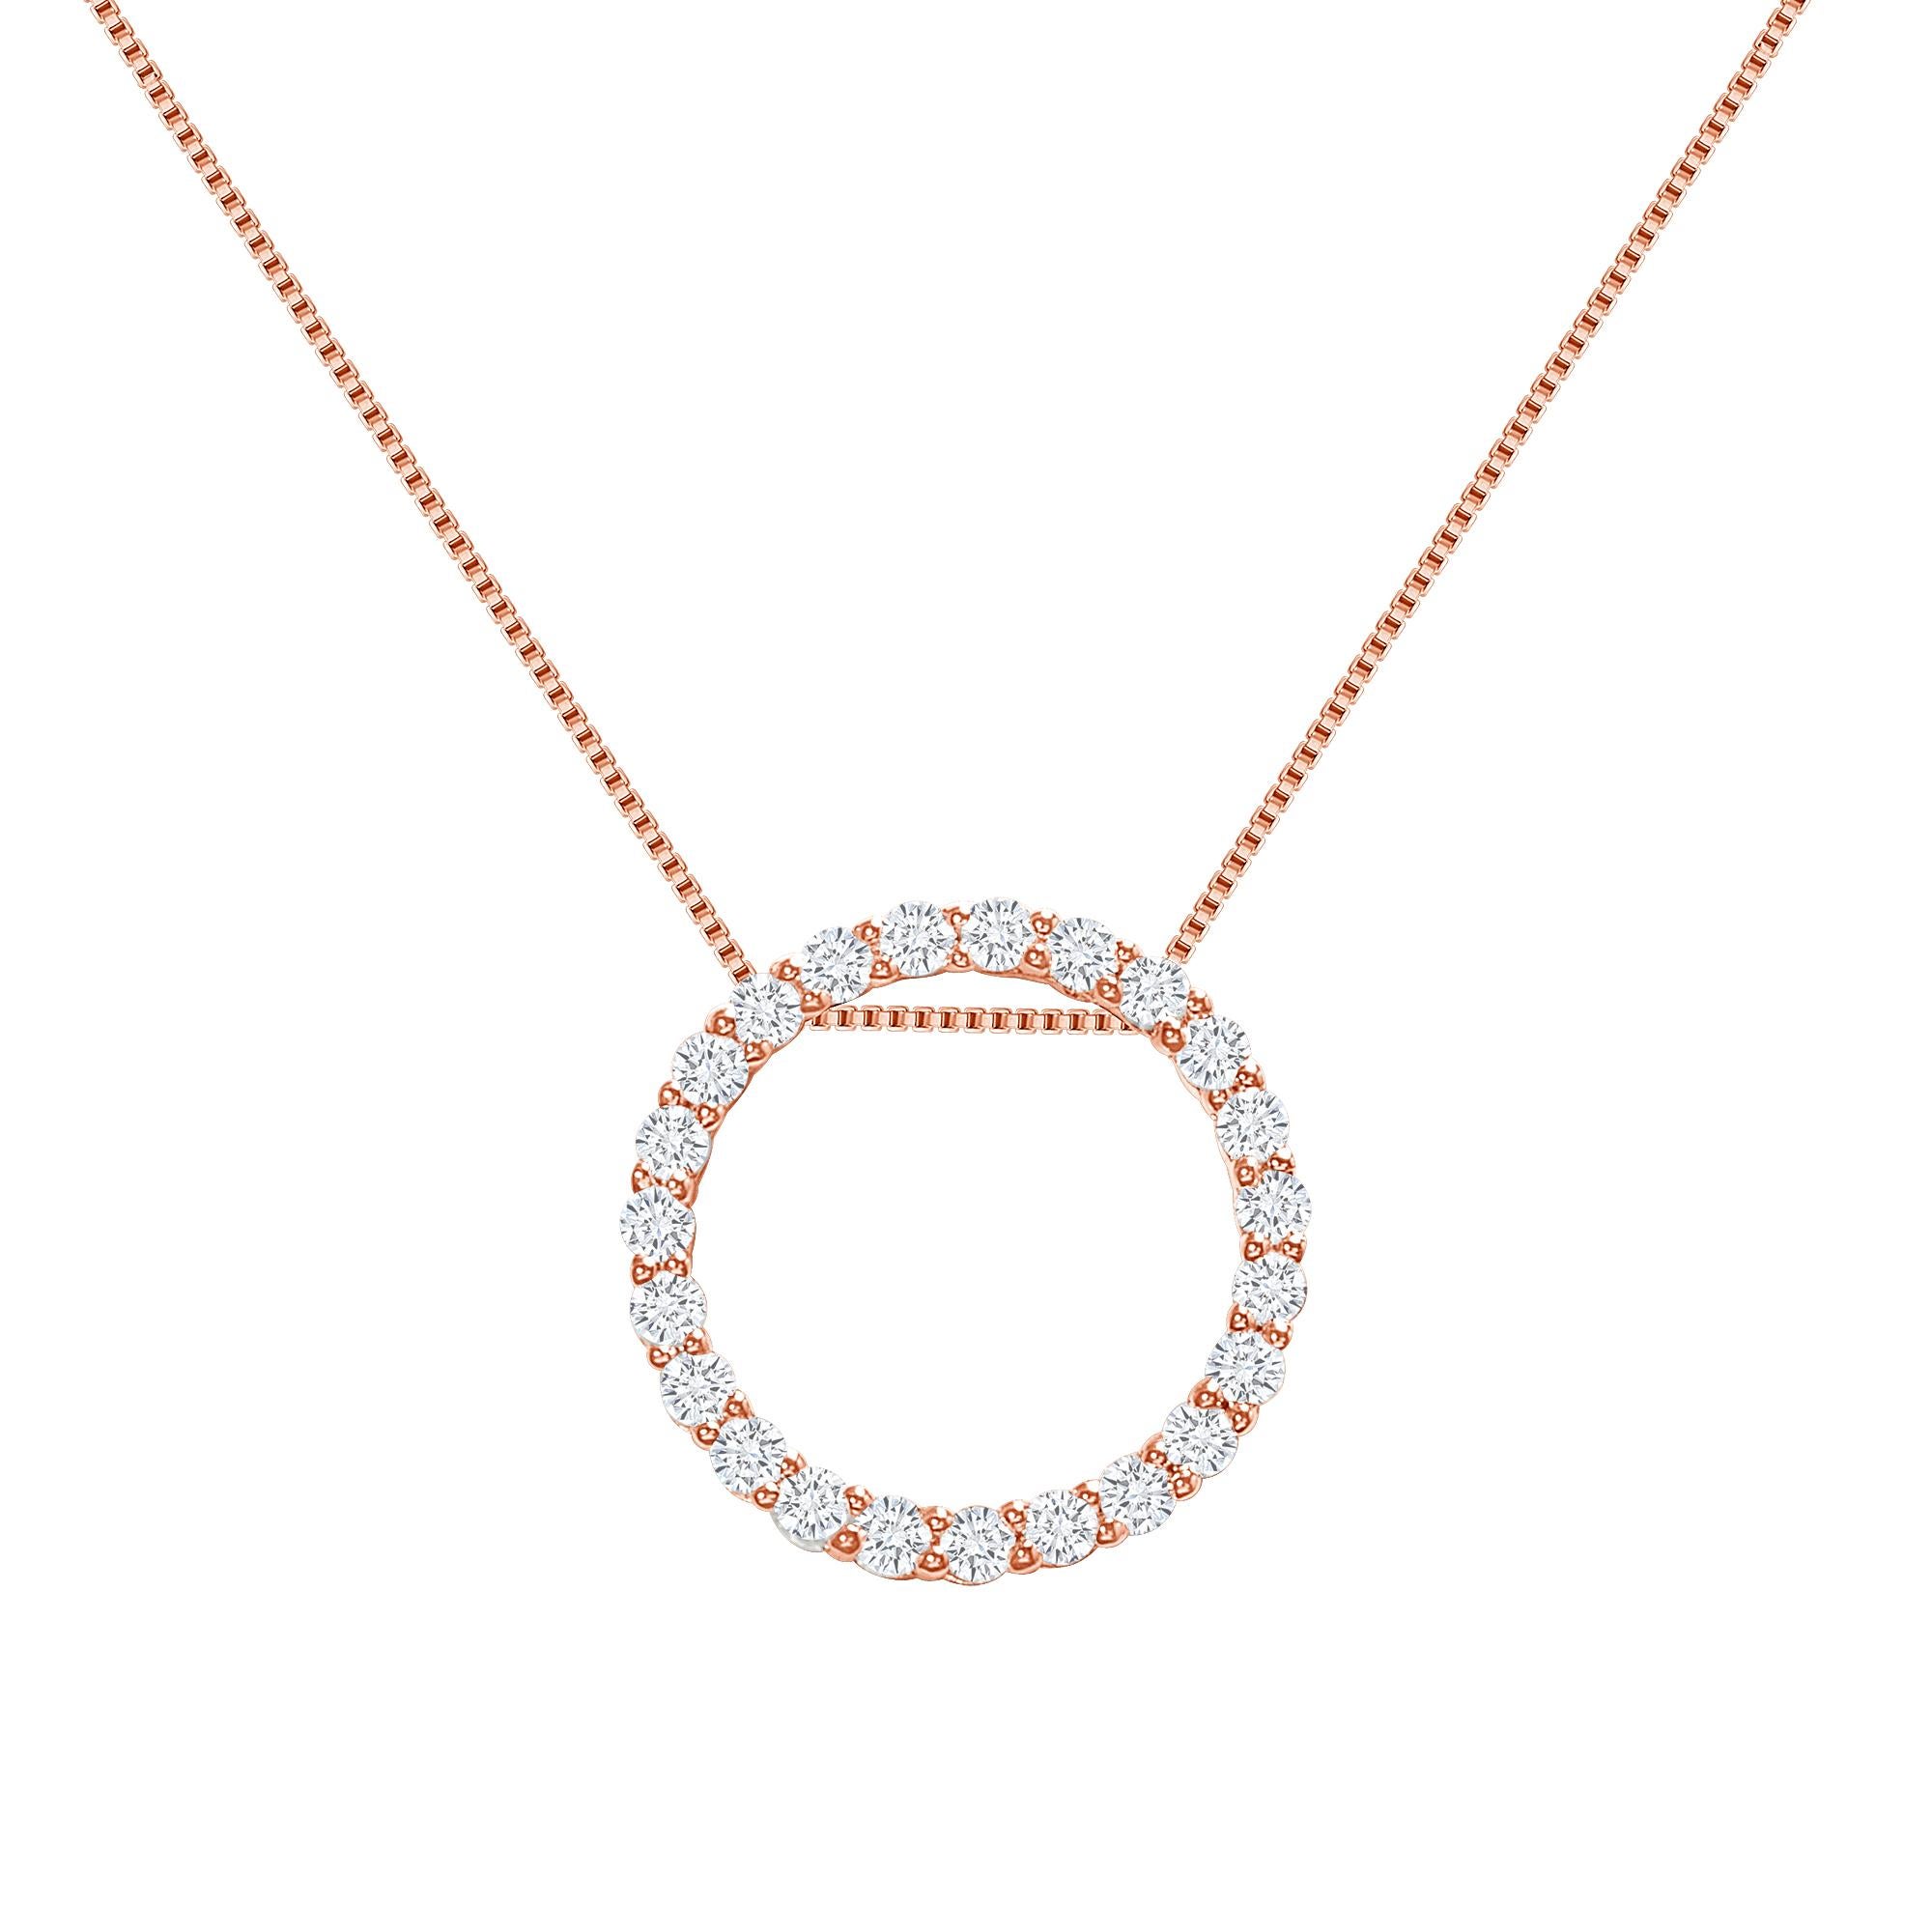 This diamond circle pendant provides a glowing chic look.
Metal: 14k Gold
Diamond Total Carats: 2 carat
Diamond Cut: Round Natural Diamonds (Not Lab Grown)
Diamond Clarity: VS
Diamond Color: F-G
Color: Rose Gold
Necklace Length: 18 inches